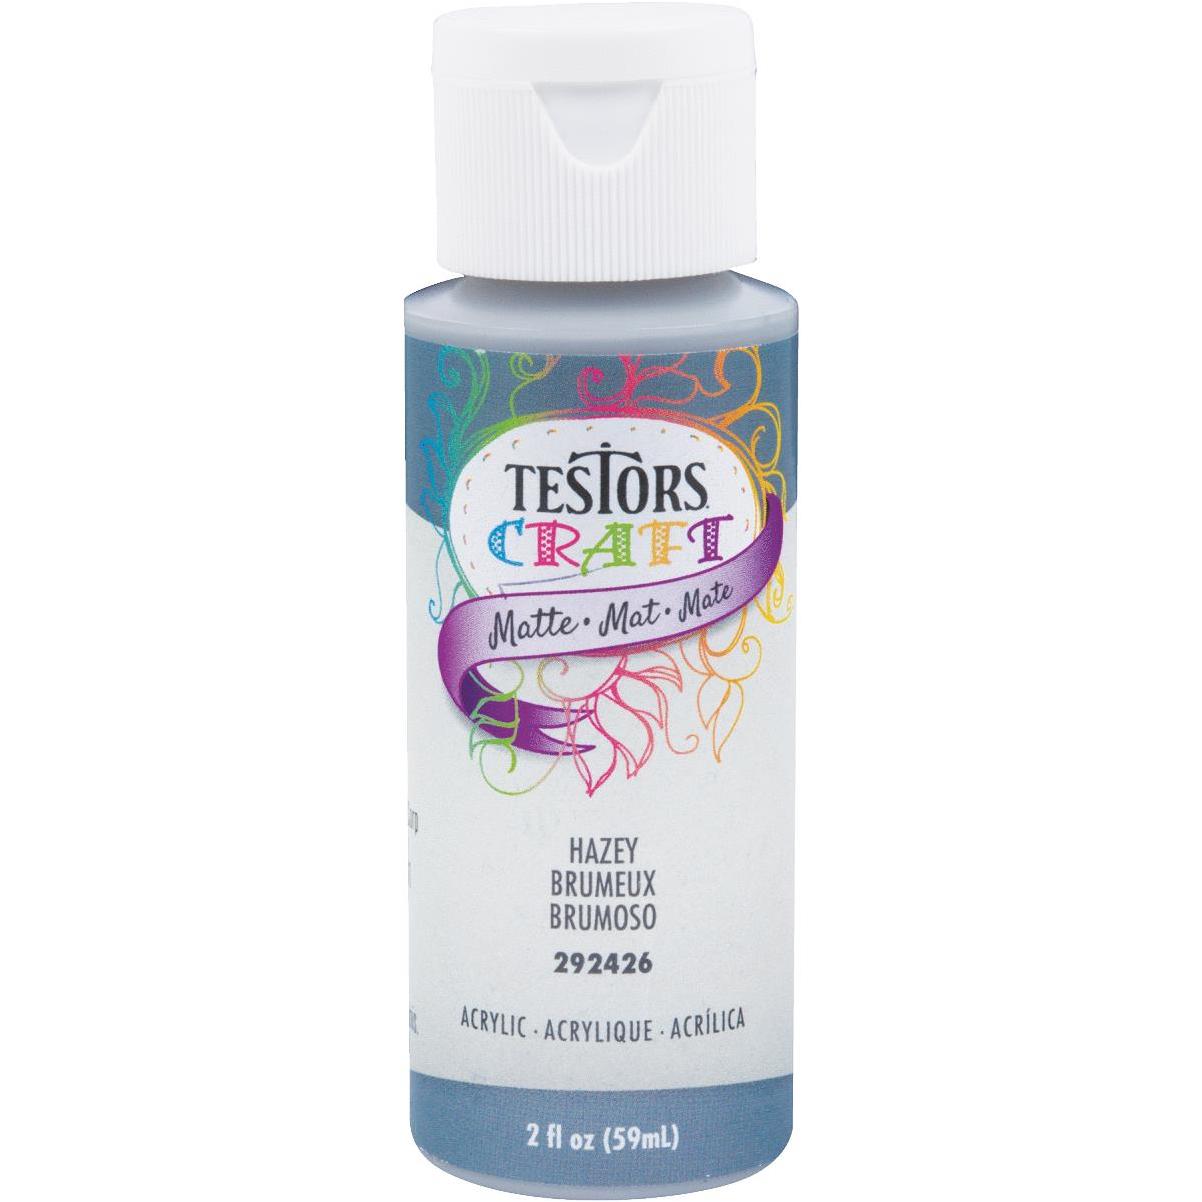 Testors Craft Matte Navy Blue Acrylic Paint in the Craft Paint department  at